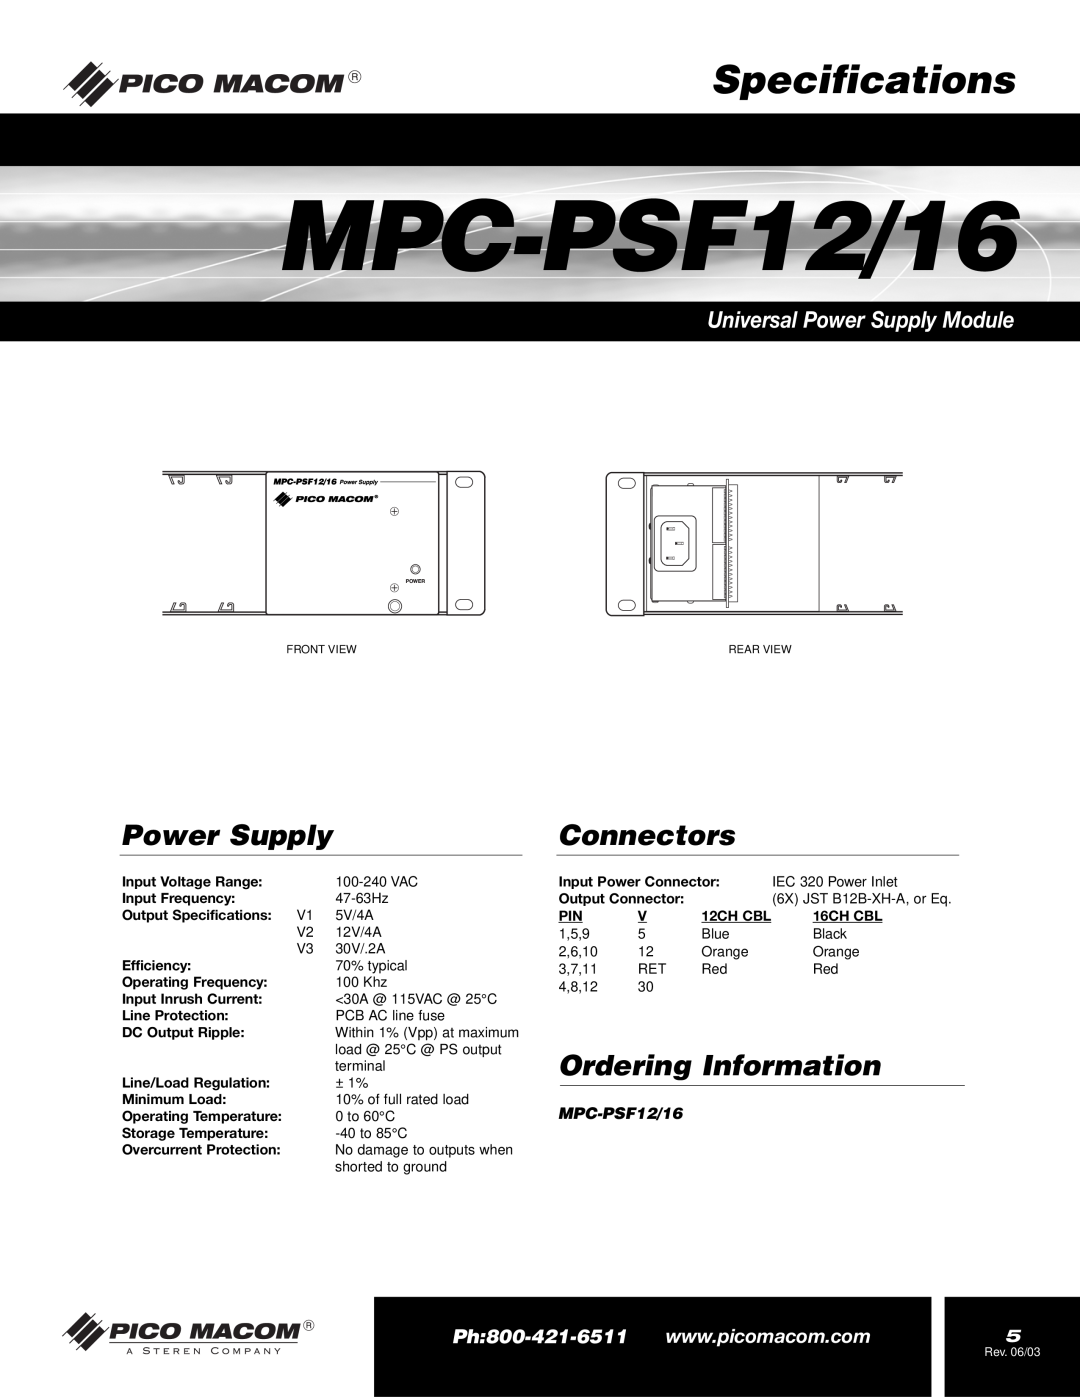 Pico Macom MPC-PSF16 operation manual Specifications, Power Supply, Connectors, Ordering Information, MPC-PSF12/16 